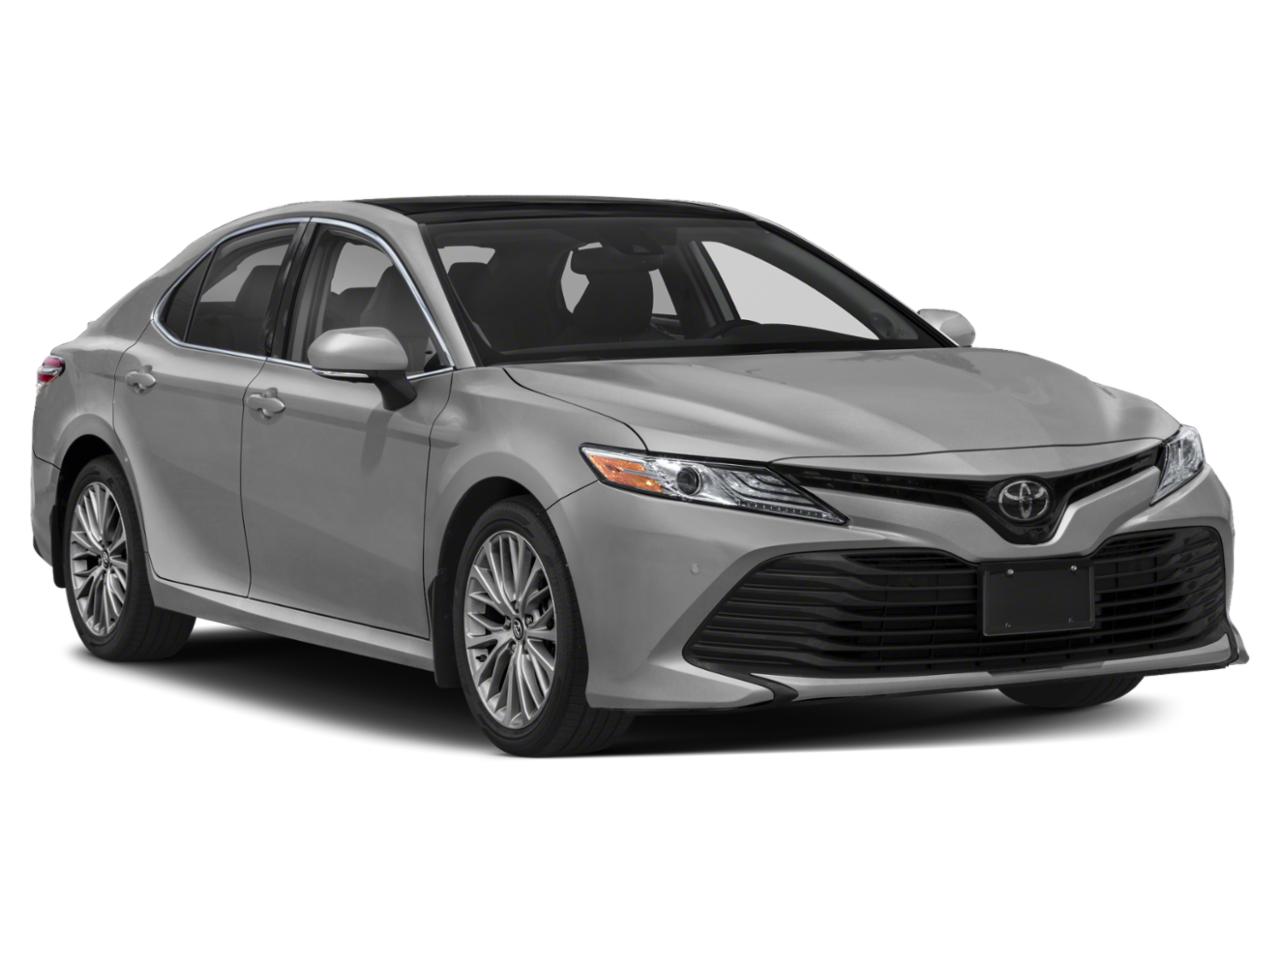 Used 2018 Celestial Silver Metallic Toyota Camry XLE V6 For Sale in ...